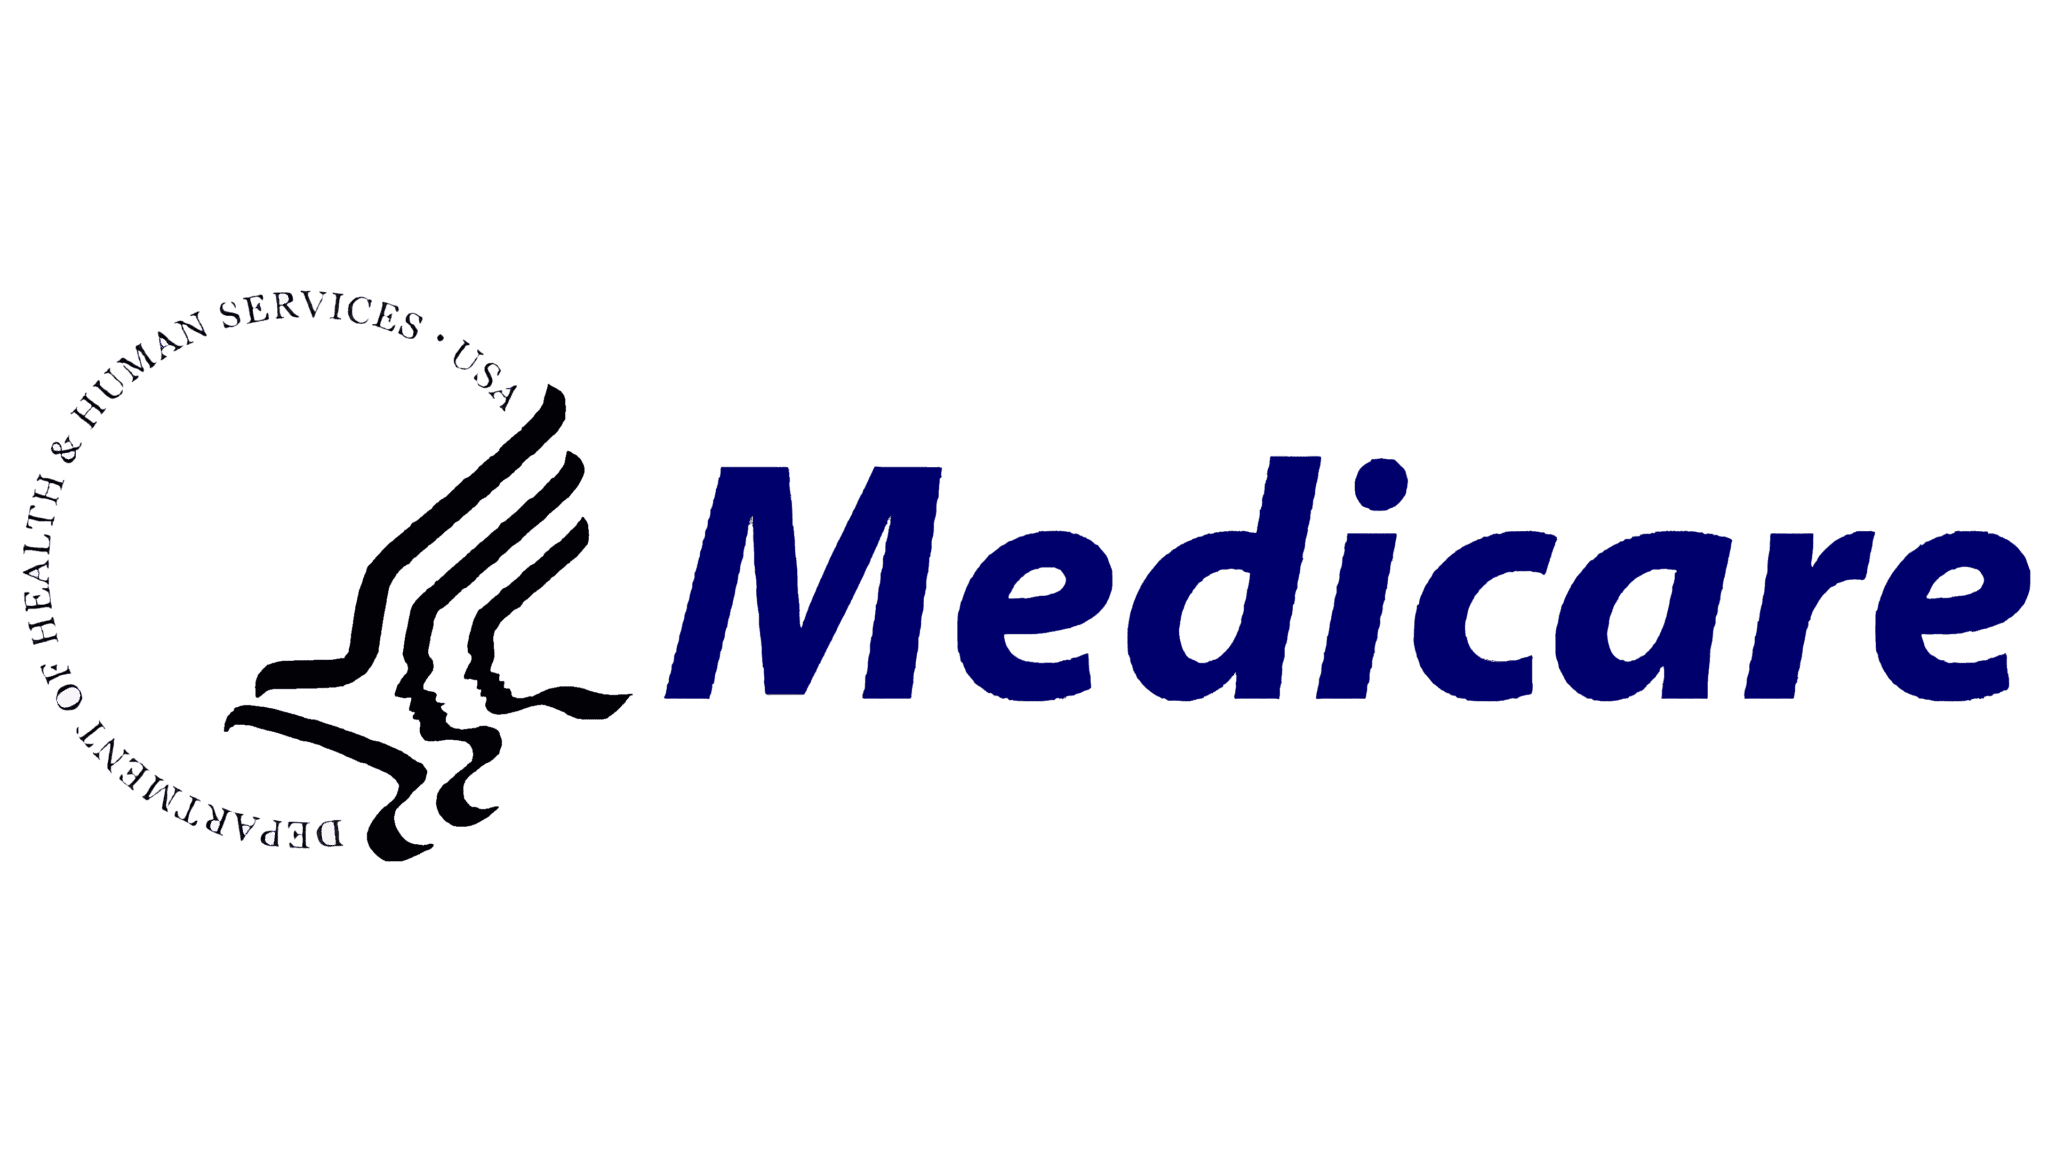 A green background with the word medical written in blue.